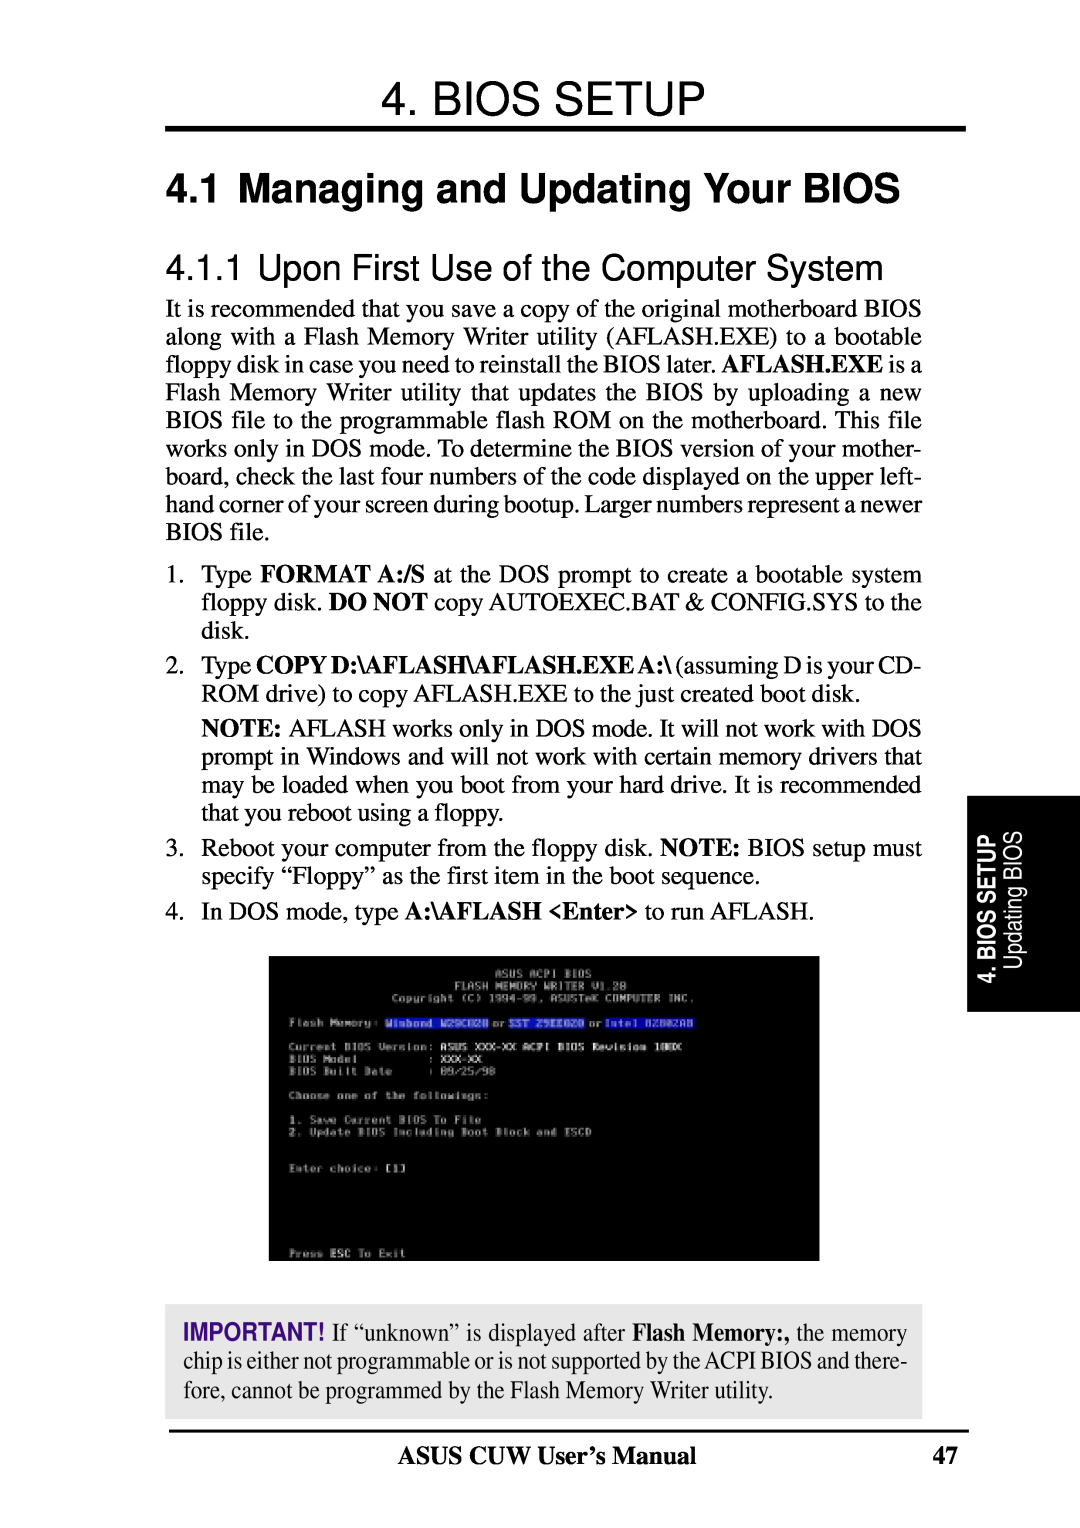 Asus 810 user manual Bios Setup, Managing and Updating Your BIOS, Upon First Use of the Computer System, Updating BIOS 